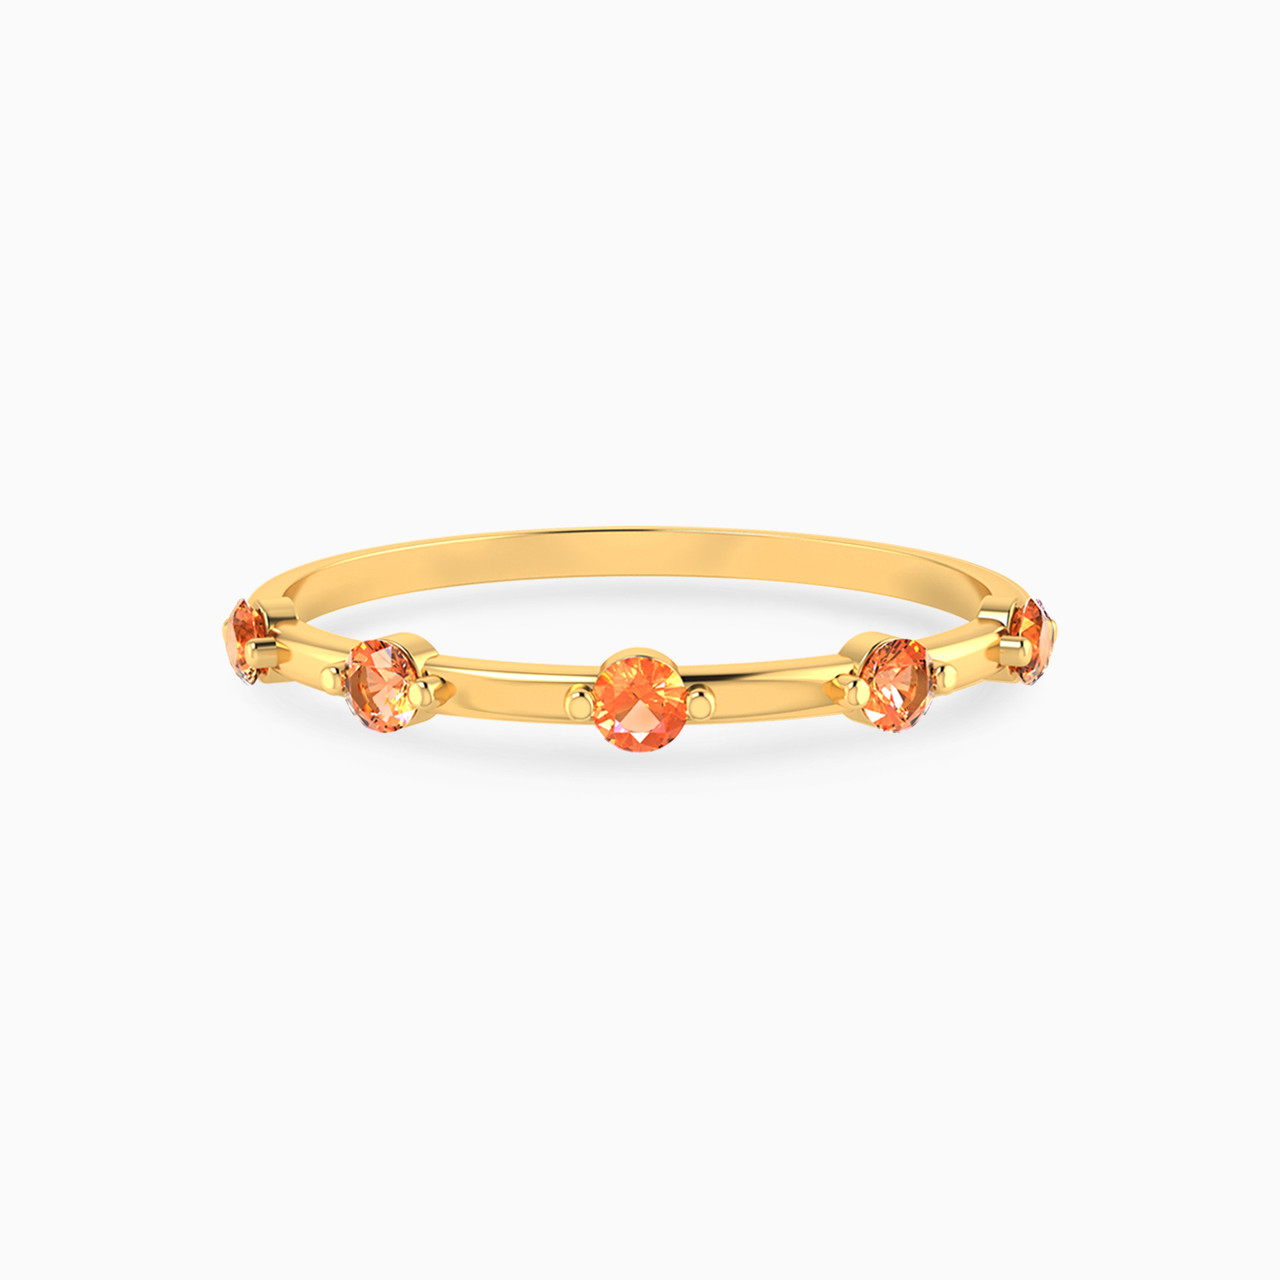 Round Shaped Colored Stones Statement Ring in 14K Gold